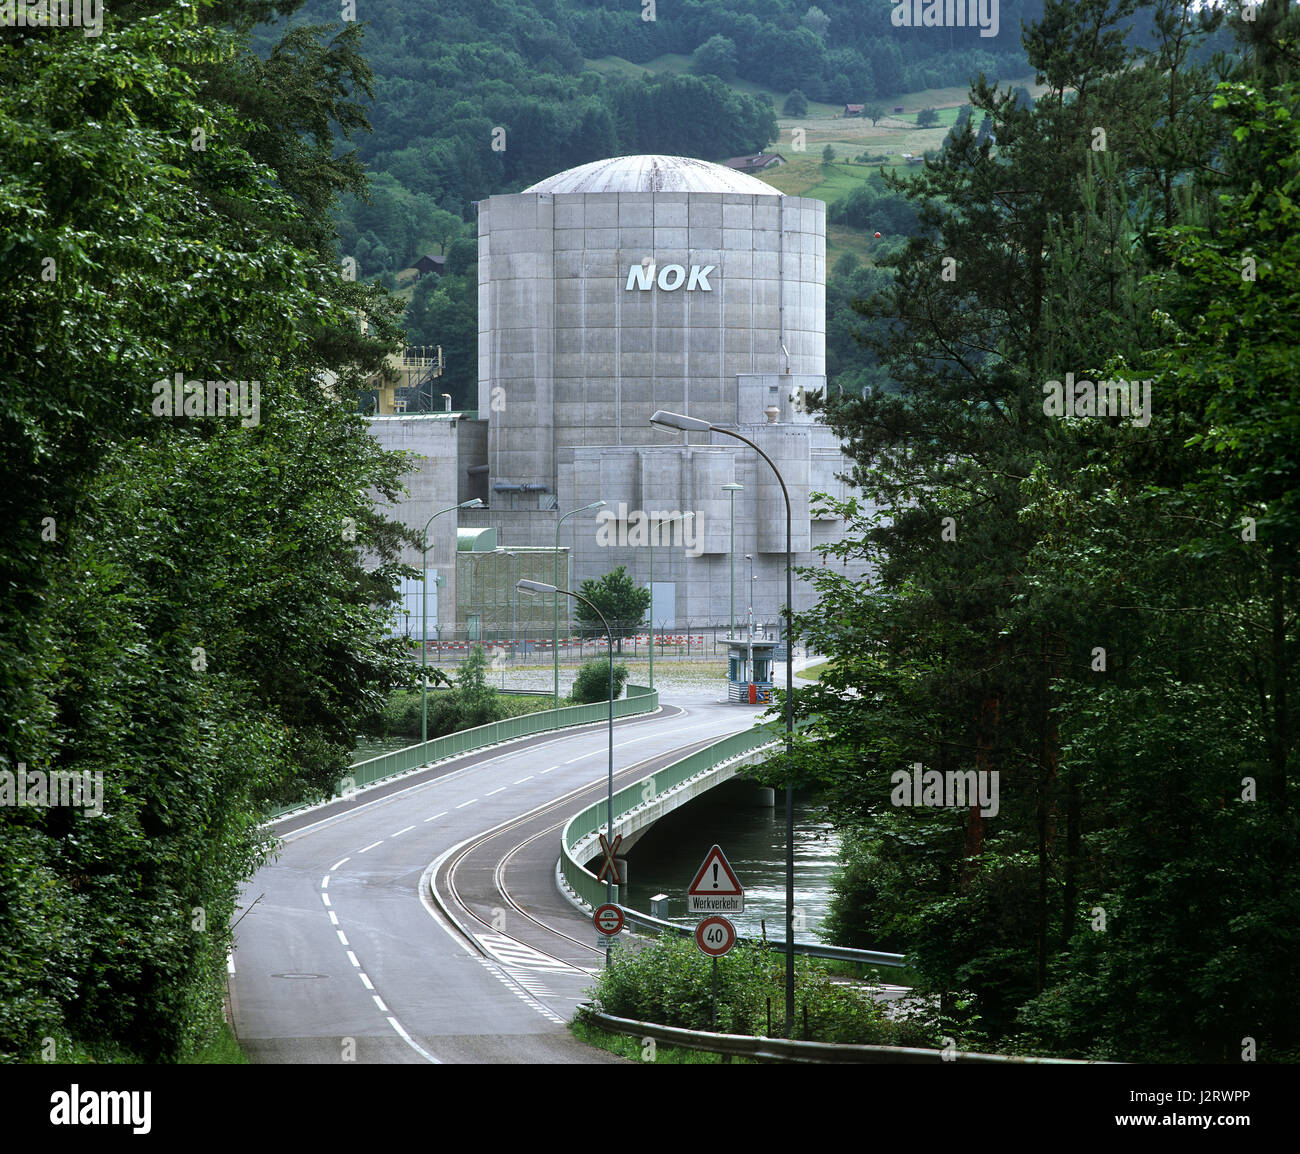 Beznau nuclear power station, near Doettingen, Switzerland.  Comprises two Pressurised Water Reactors (PWRs)  commissioned in 1969 and 1972. Stock Photo